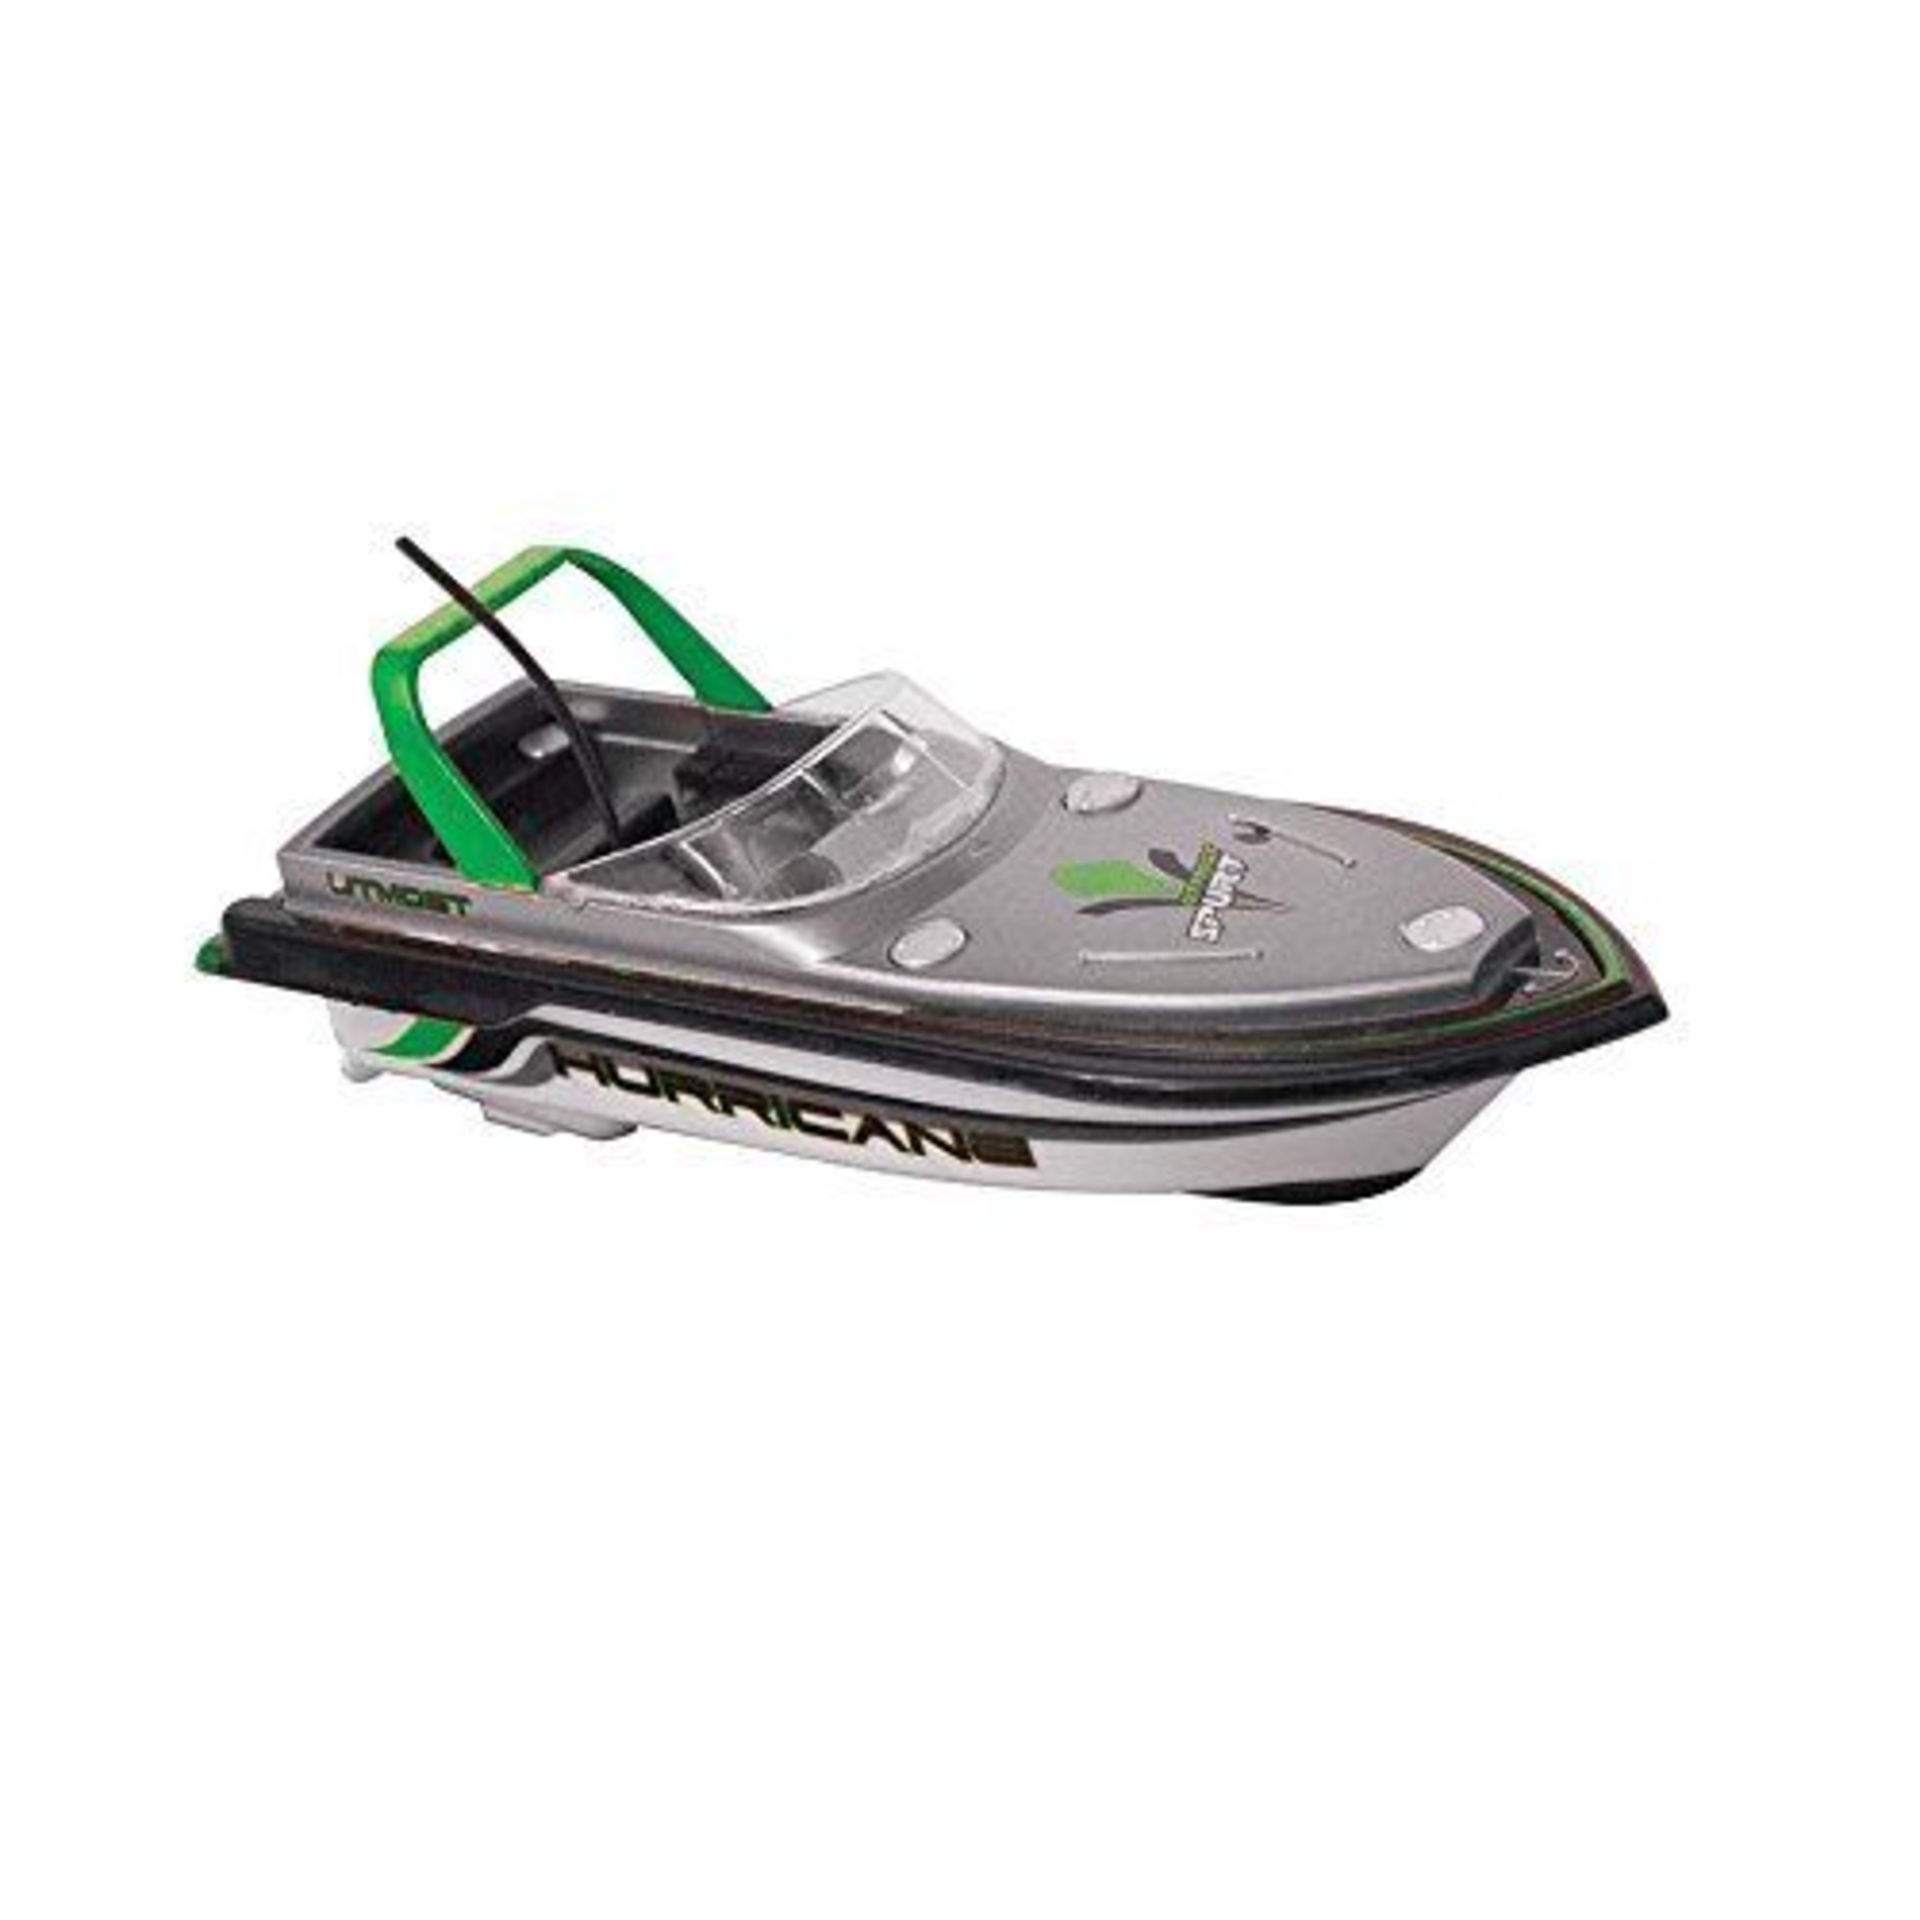 V *TRADE QTY* Brand New Radio Controlled Sport Series Mini Boat Colour May Vary ISP £20-98 (Ebay)